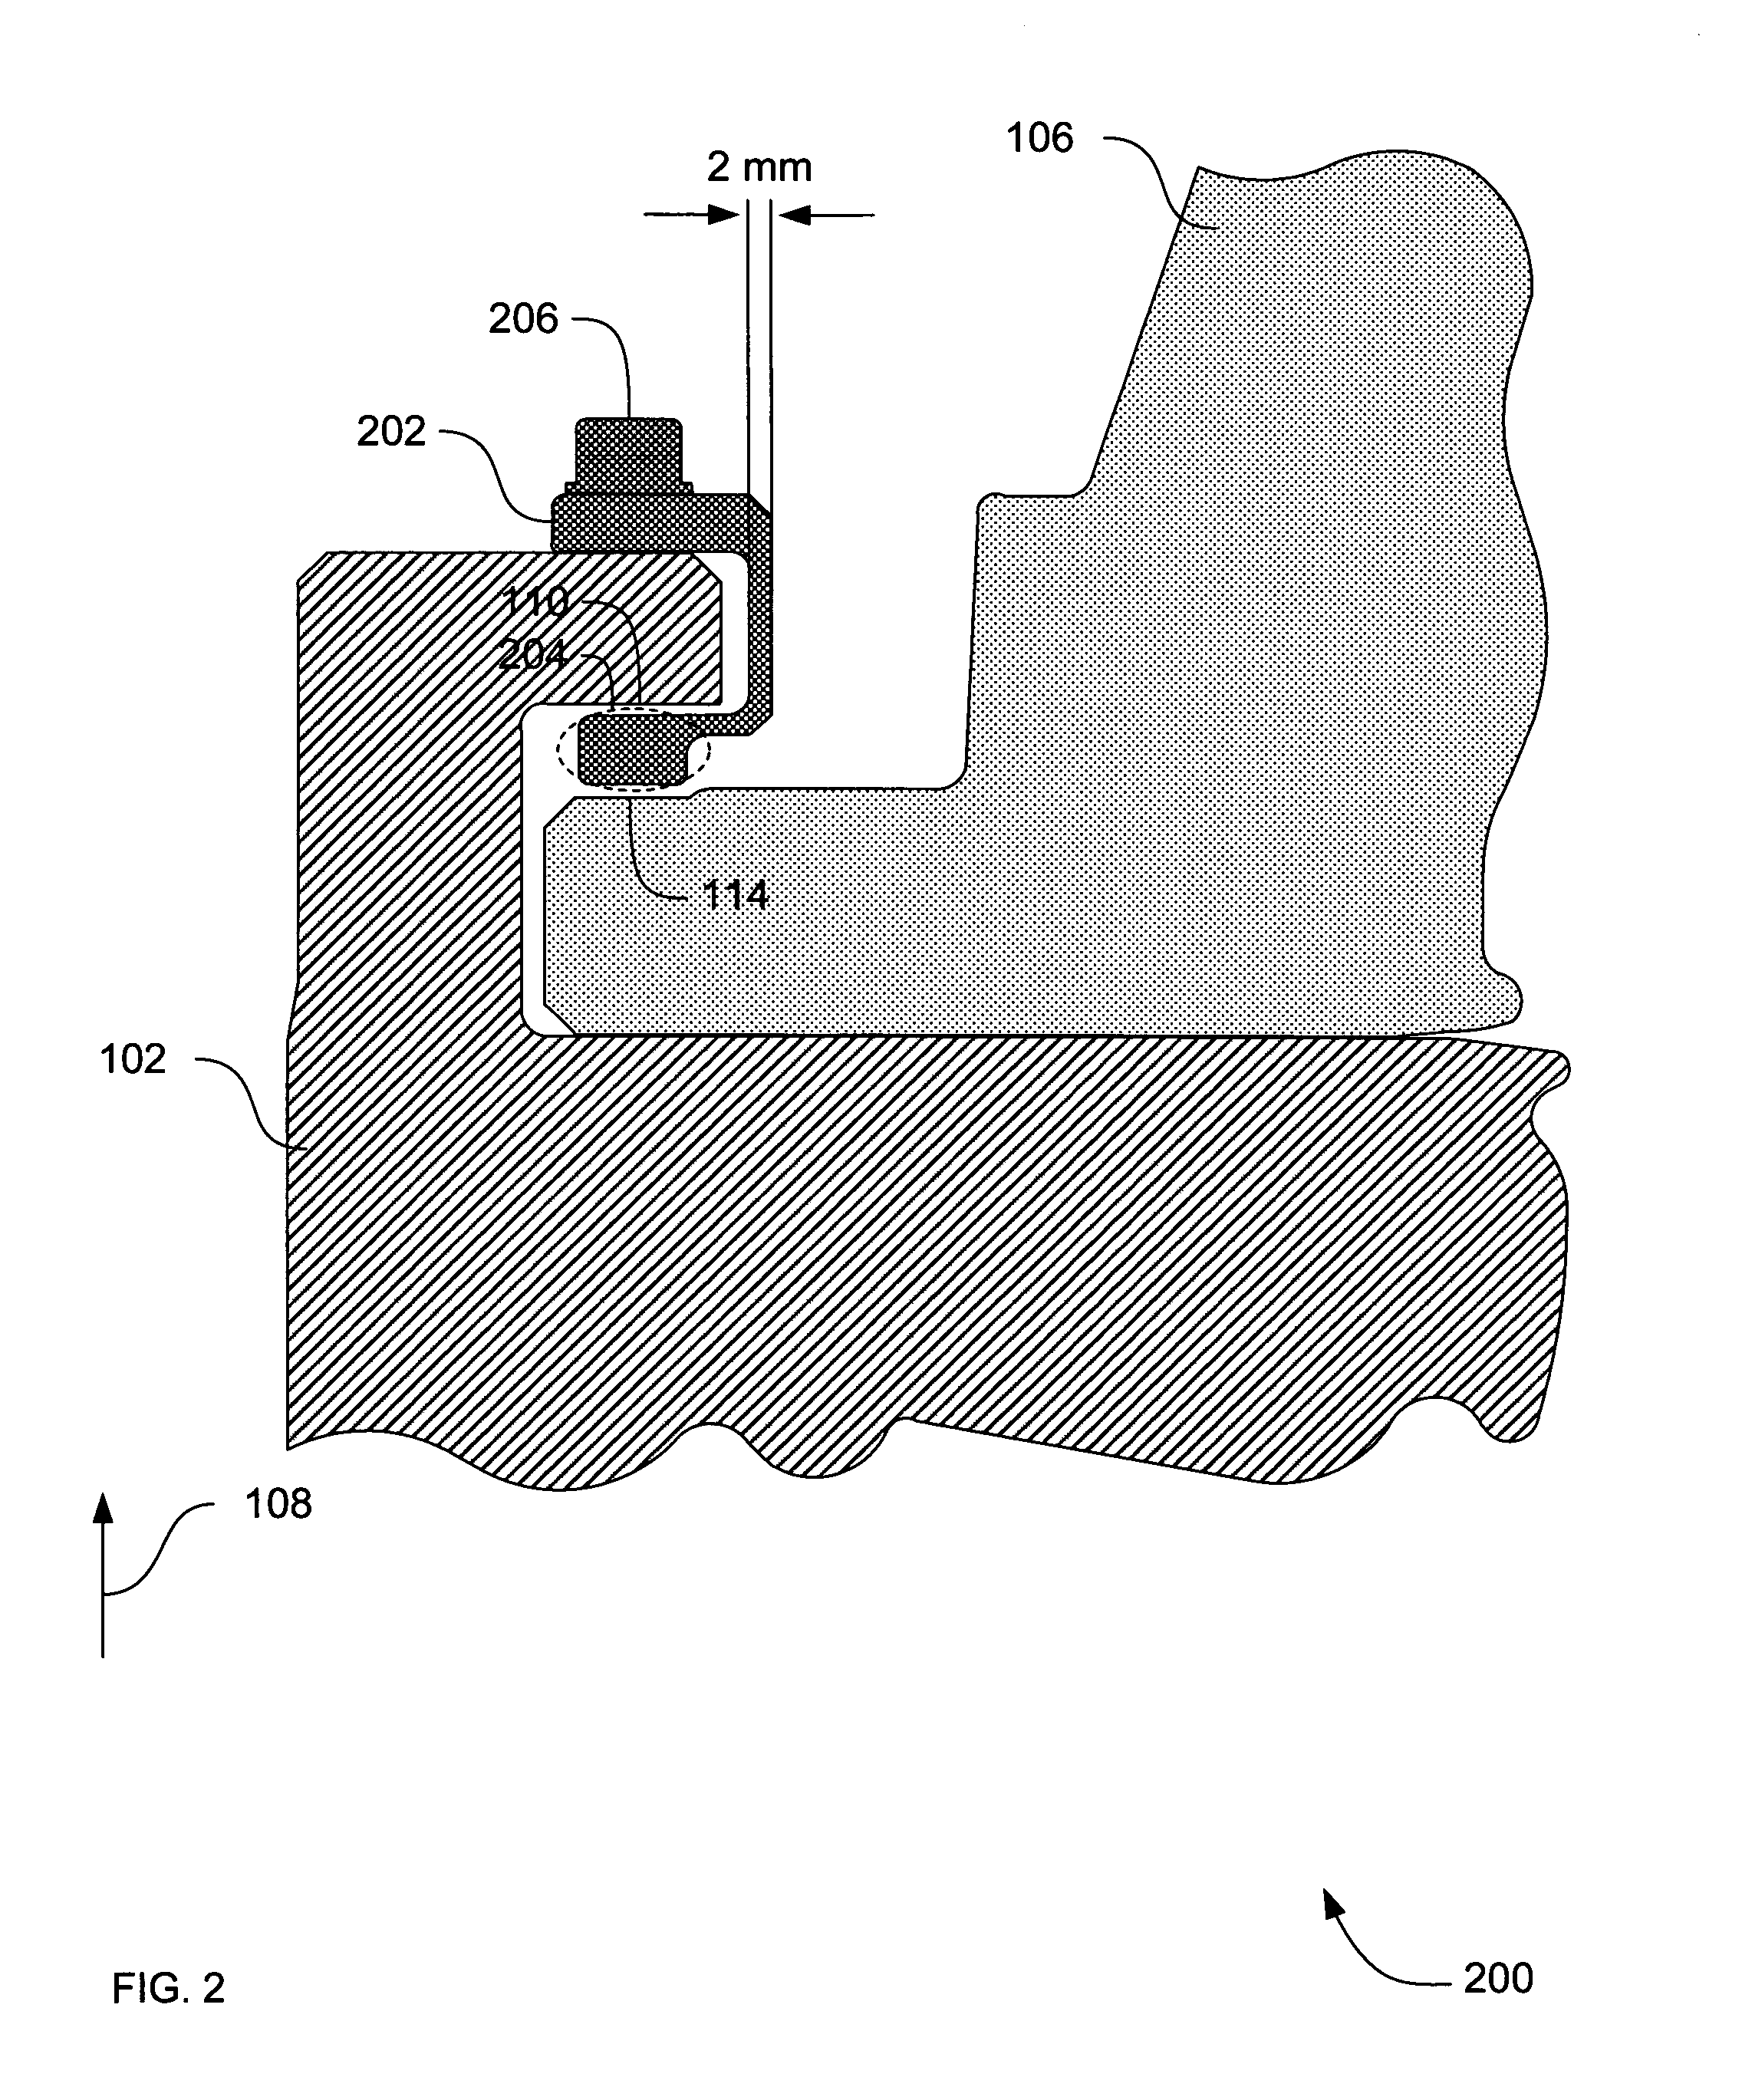 Systems, methods and apparatus for attachment of an X-ray tube to an X-ray tube collimator frame